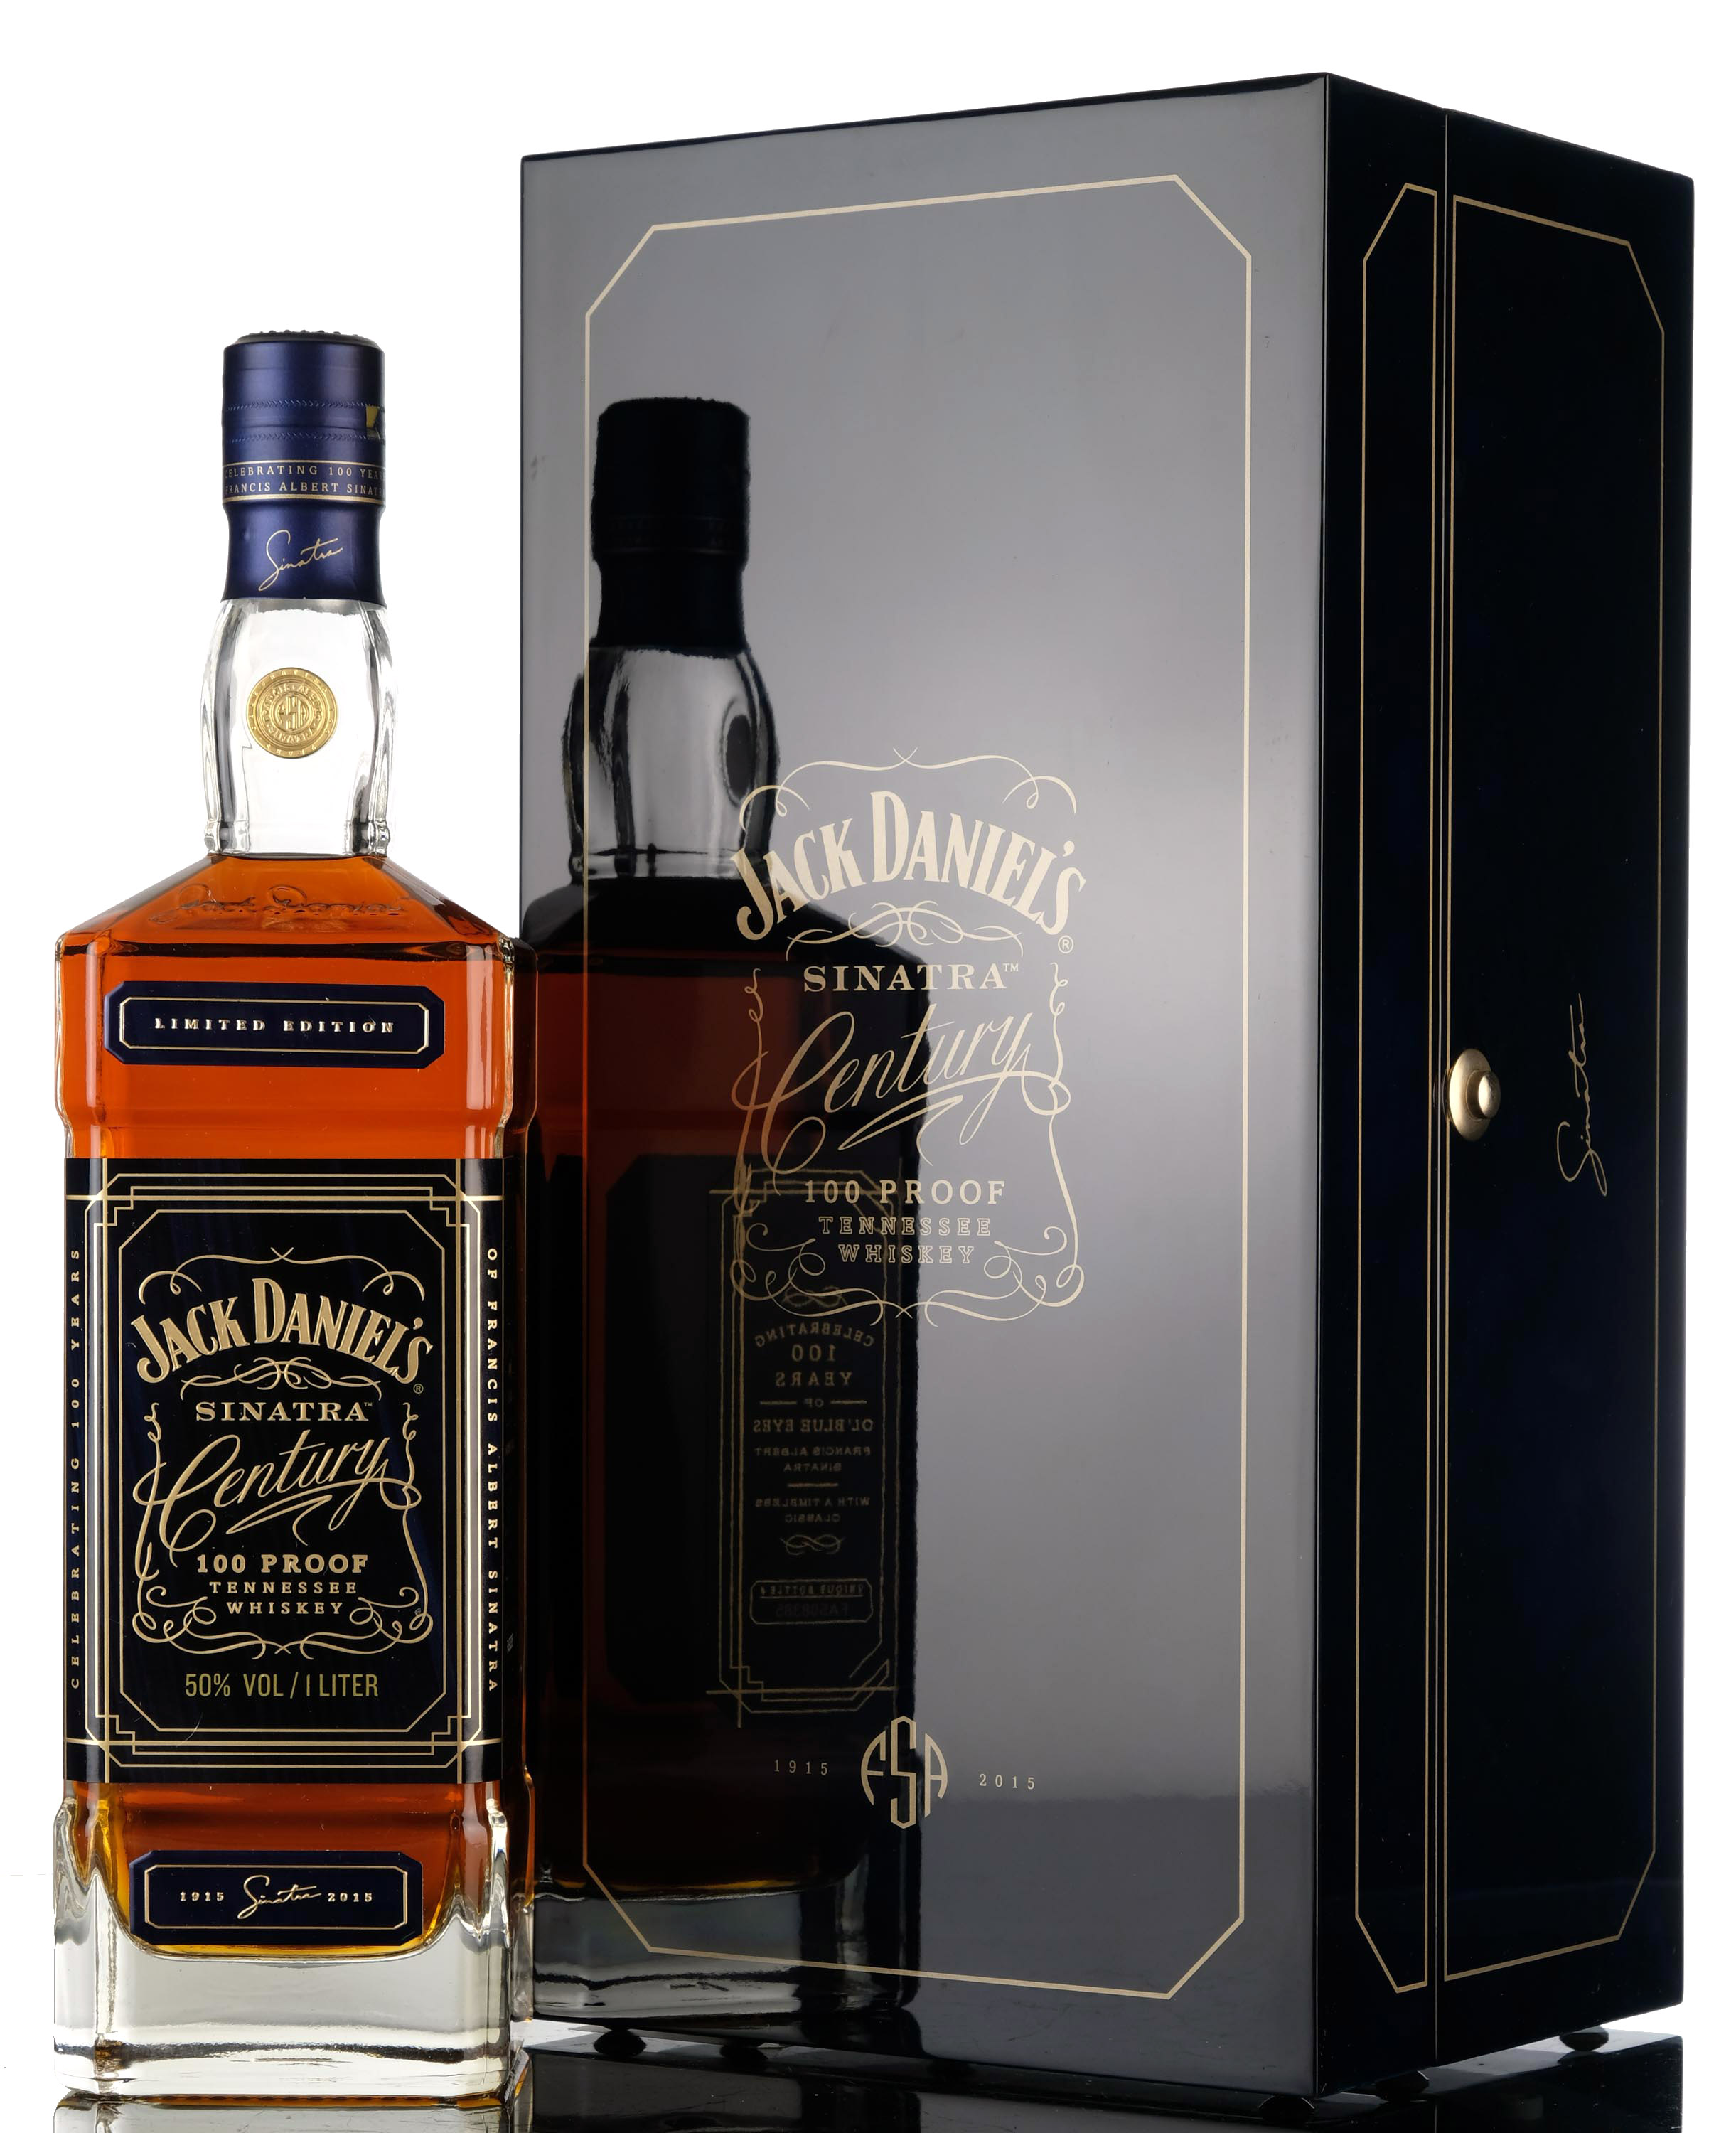 Jack Daniels Sinatra Select - Limited Edition - 2015 Release - 1 Litre